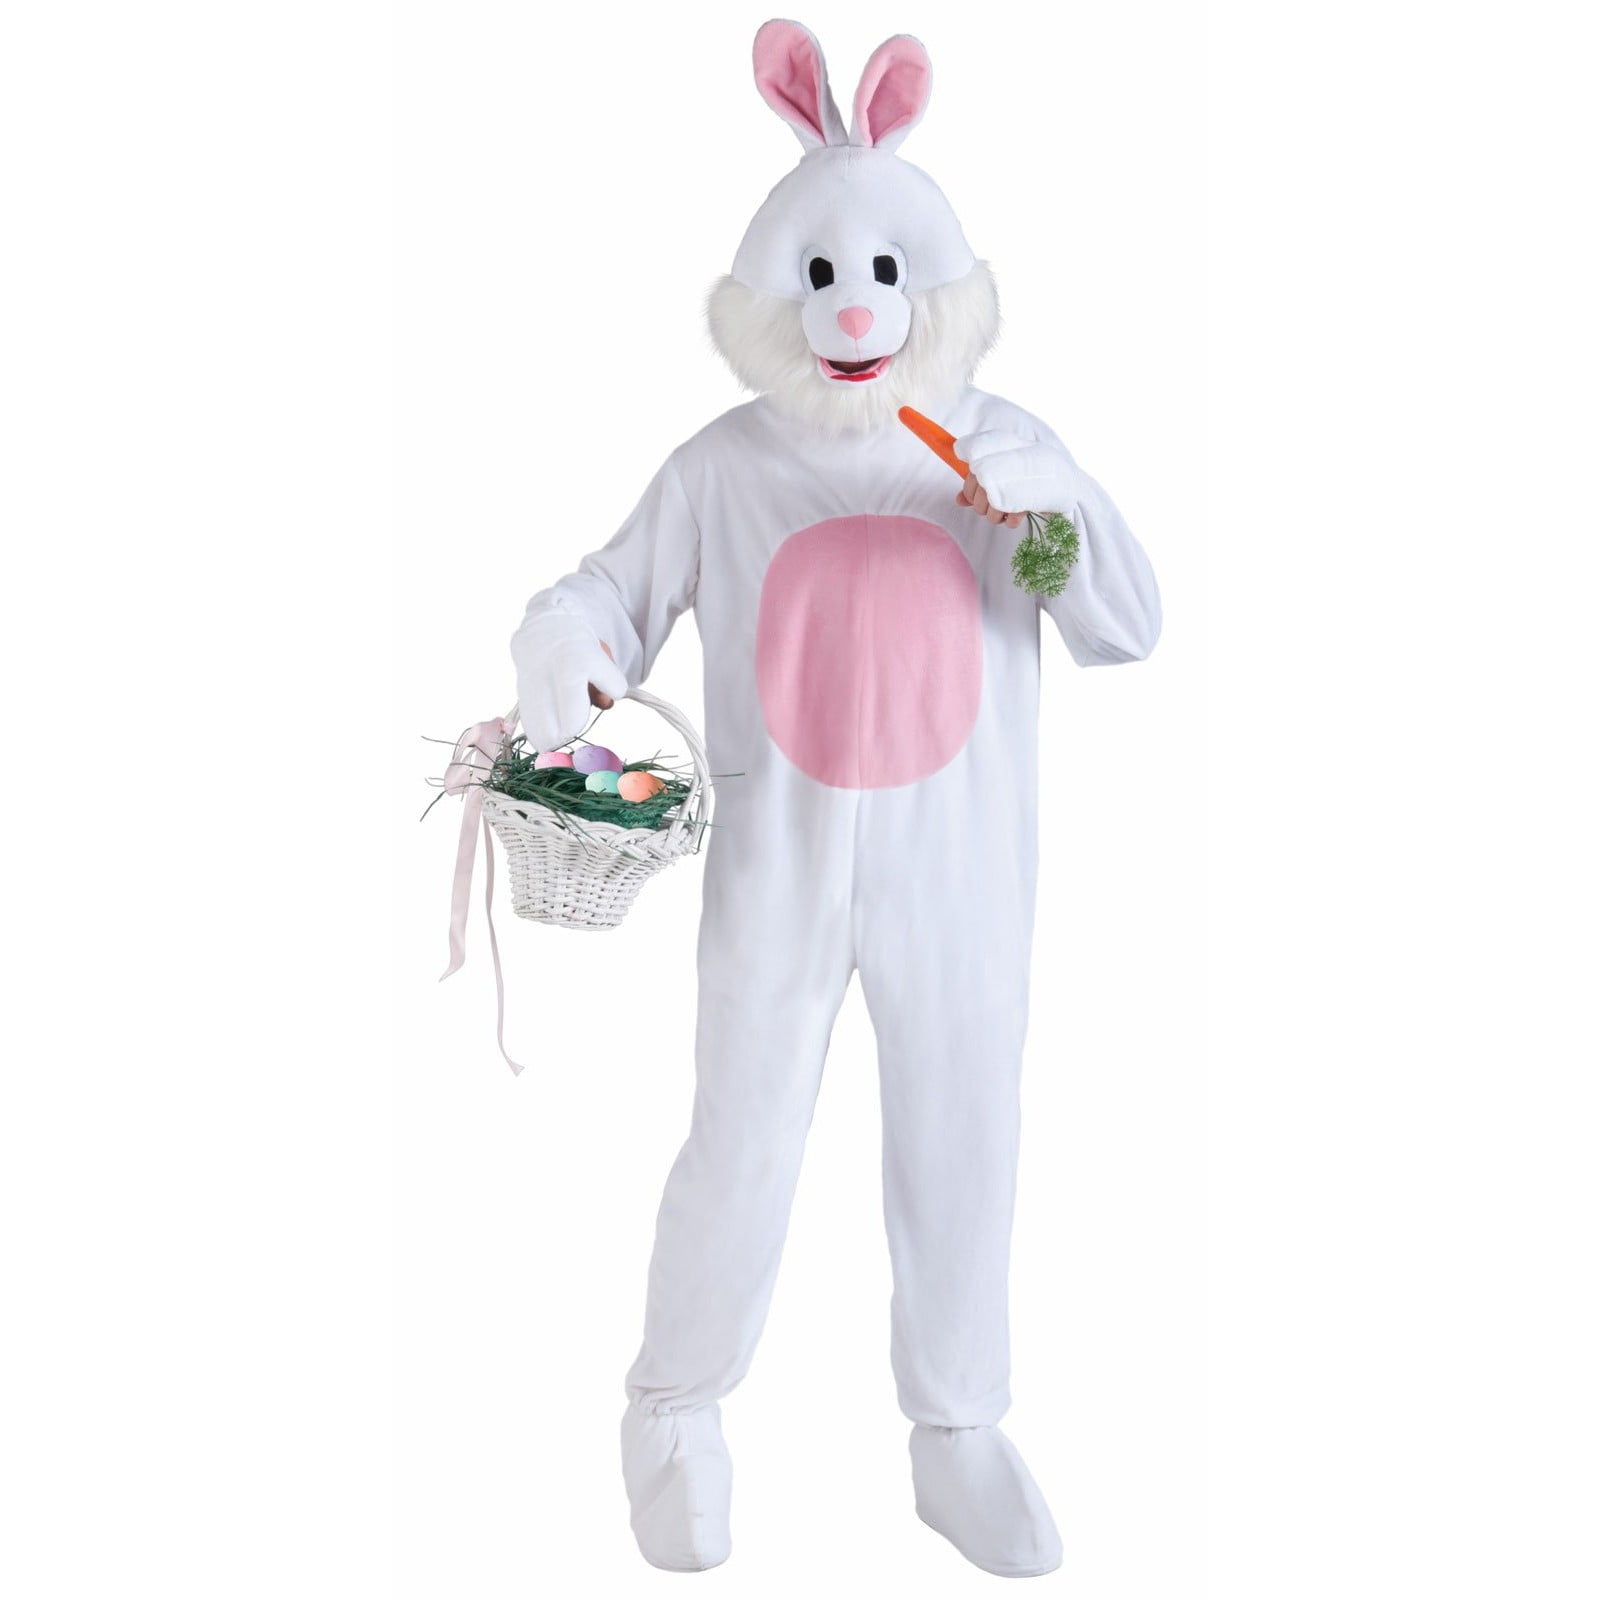 EASTER BUNNY COSTUME SET EARS TAIL NOSE FACE PAINT AND BASKET RABBIT FANCY DRESS 